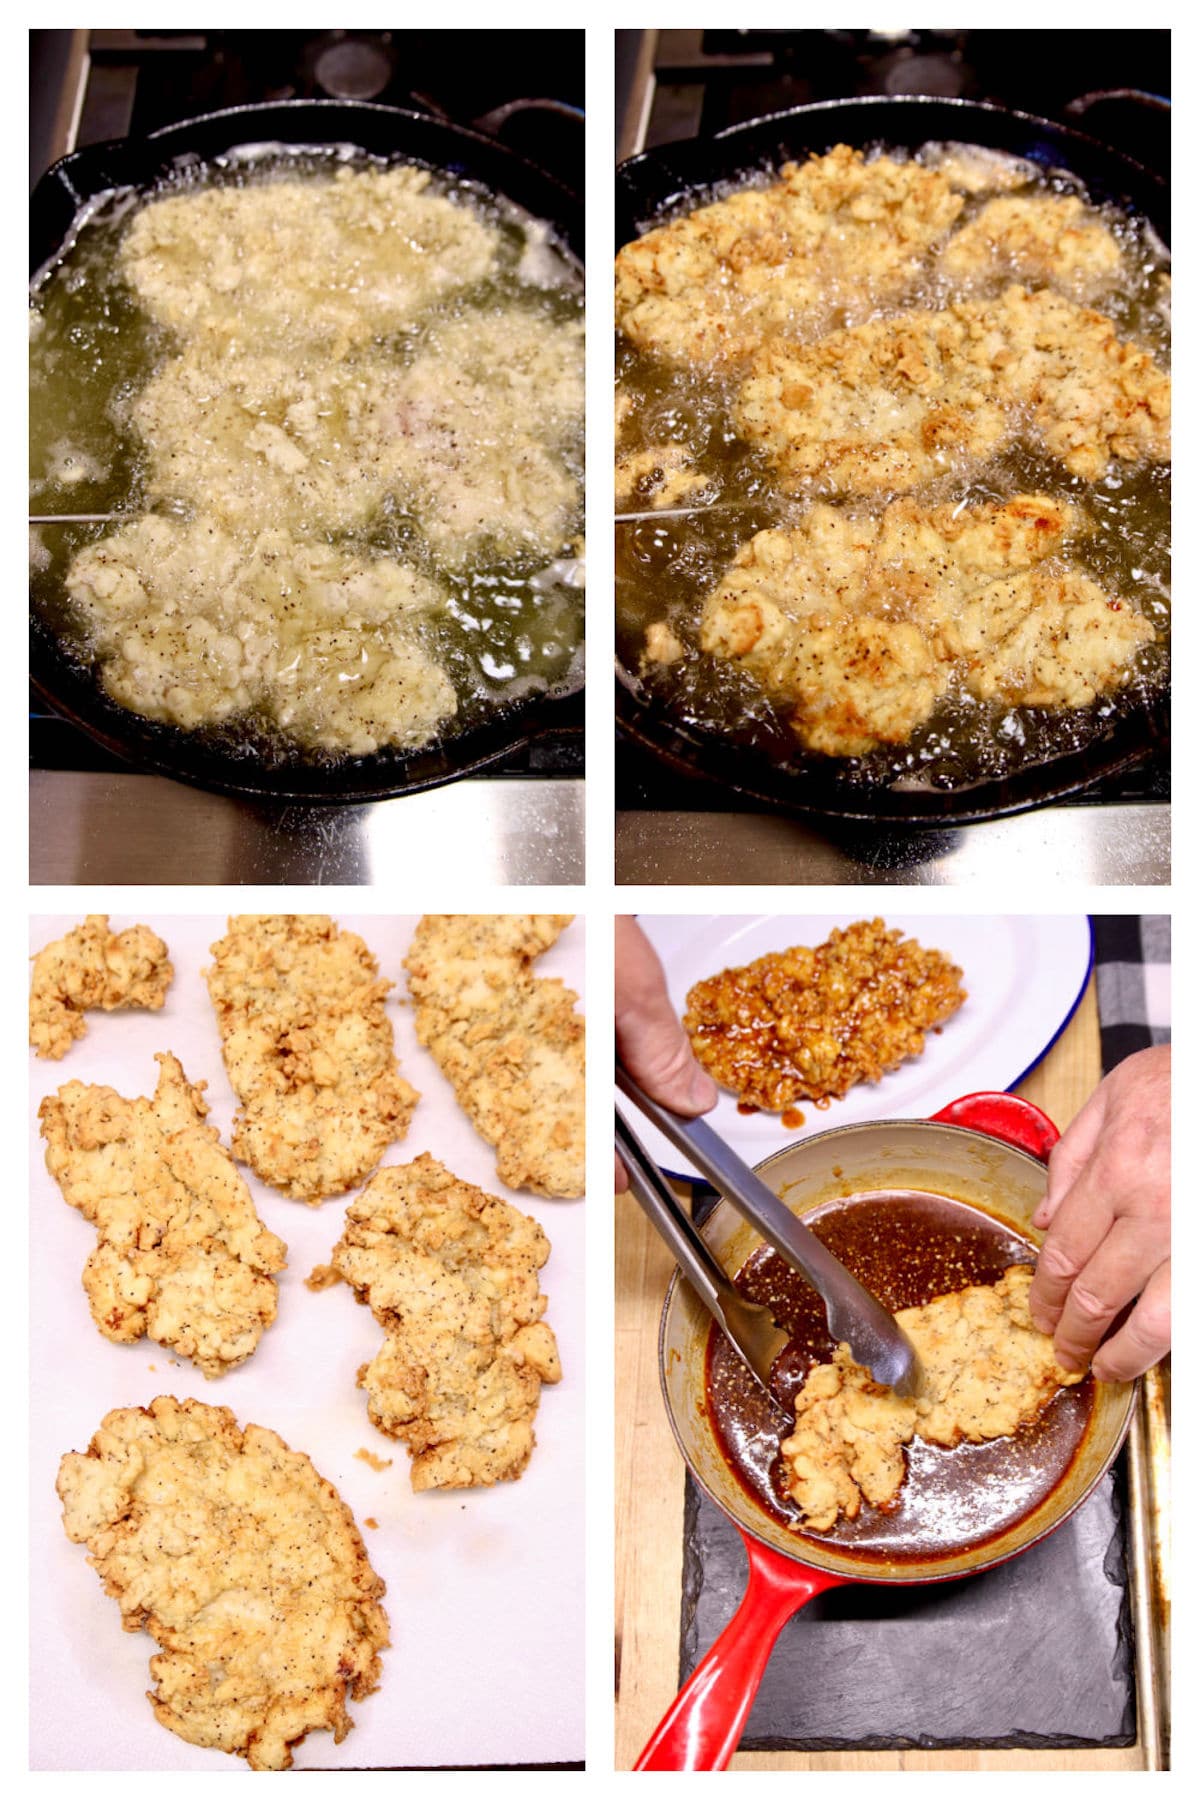 Collage frying chicken tenders, dipping into sauce.